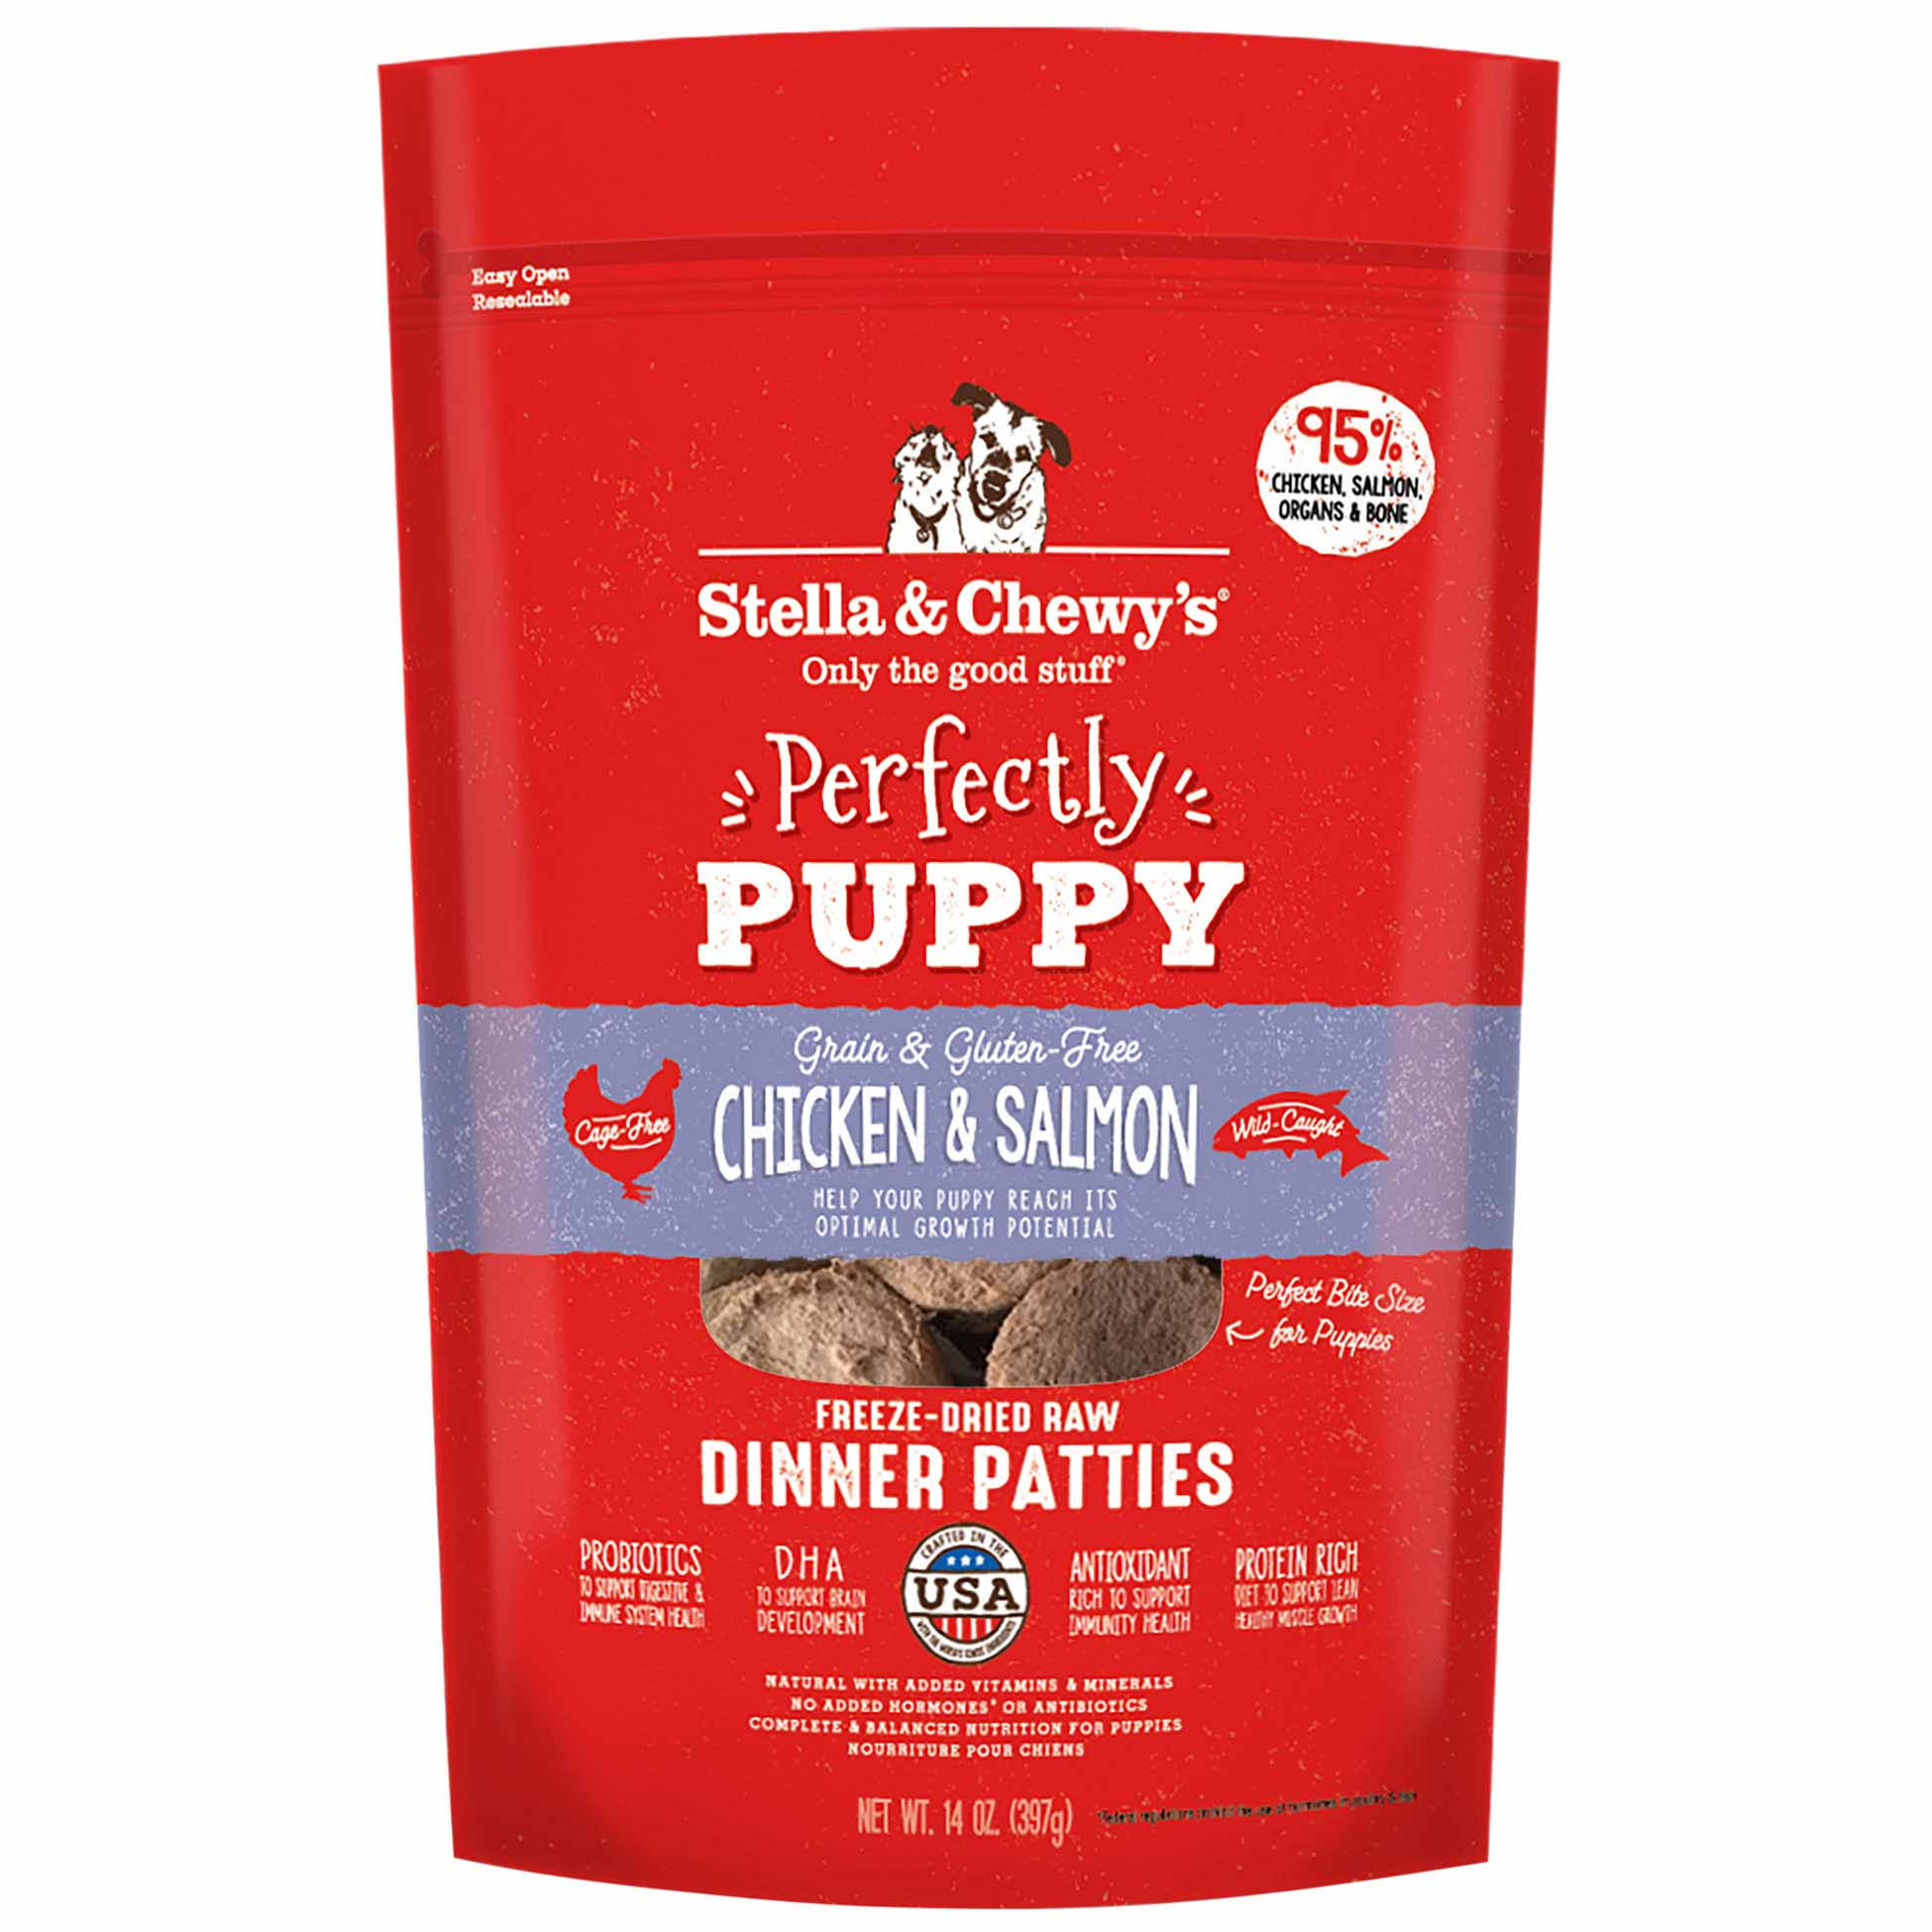 Stella & Chewy's Perfectly Puppy Chicken & Salmon Dinner Patties Freeze-Dried Raw Dog Food 14 oz.